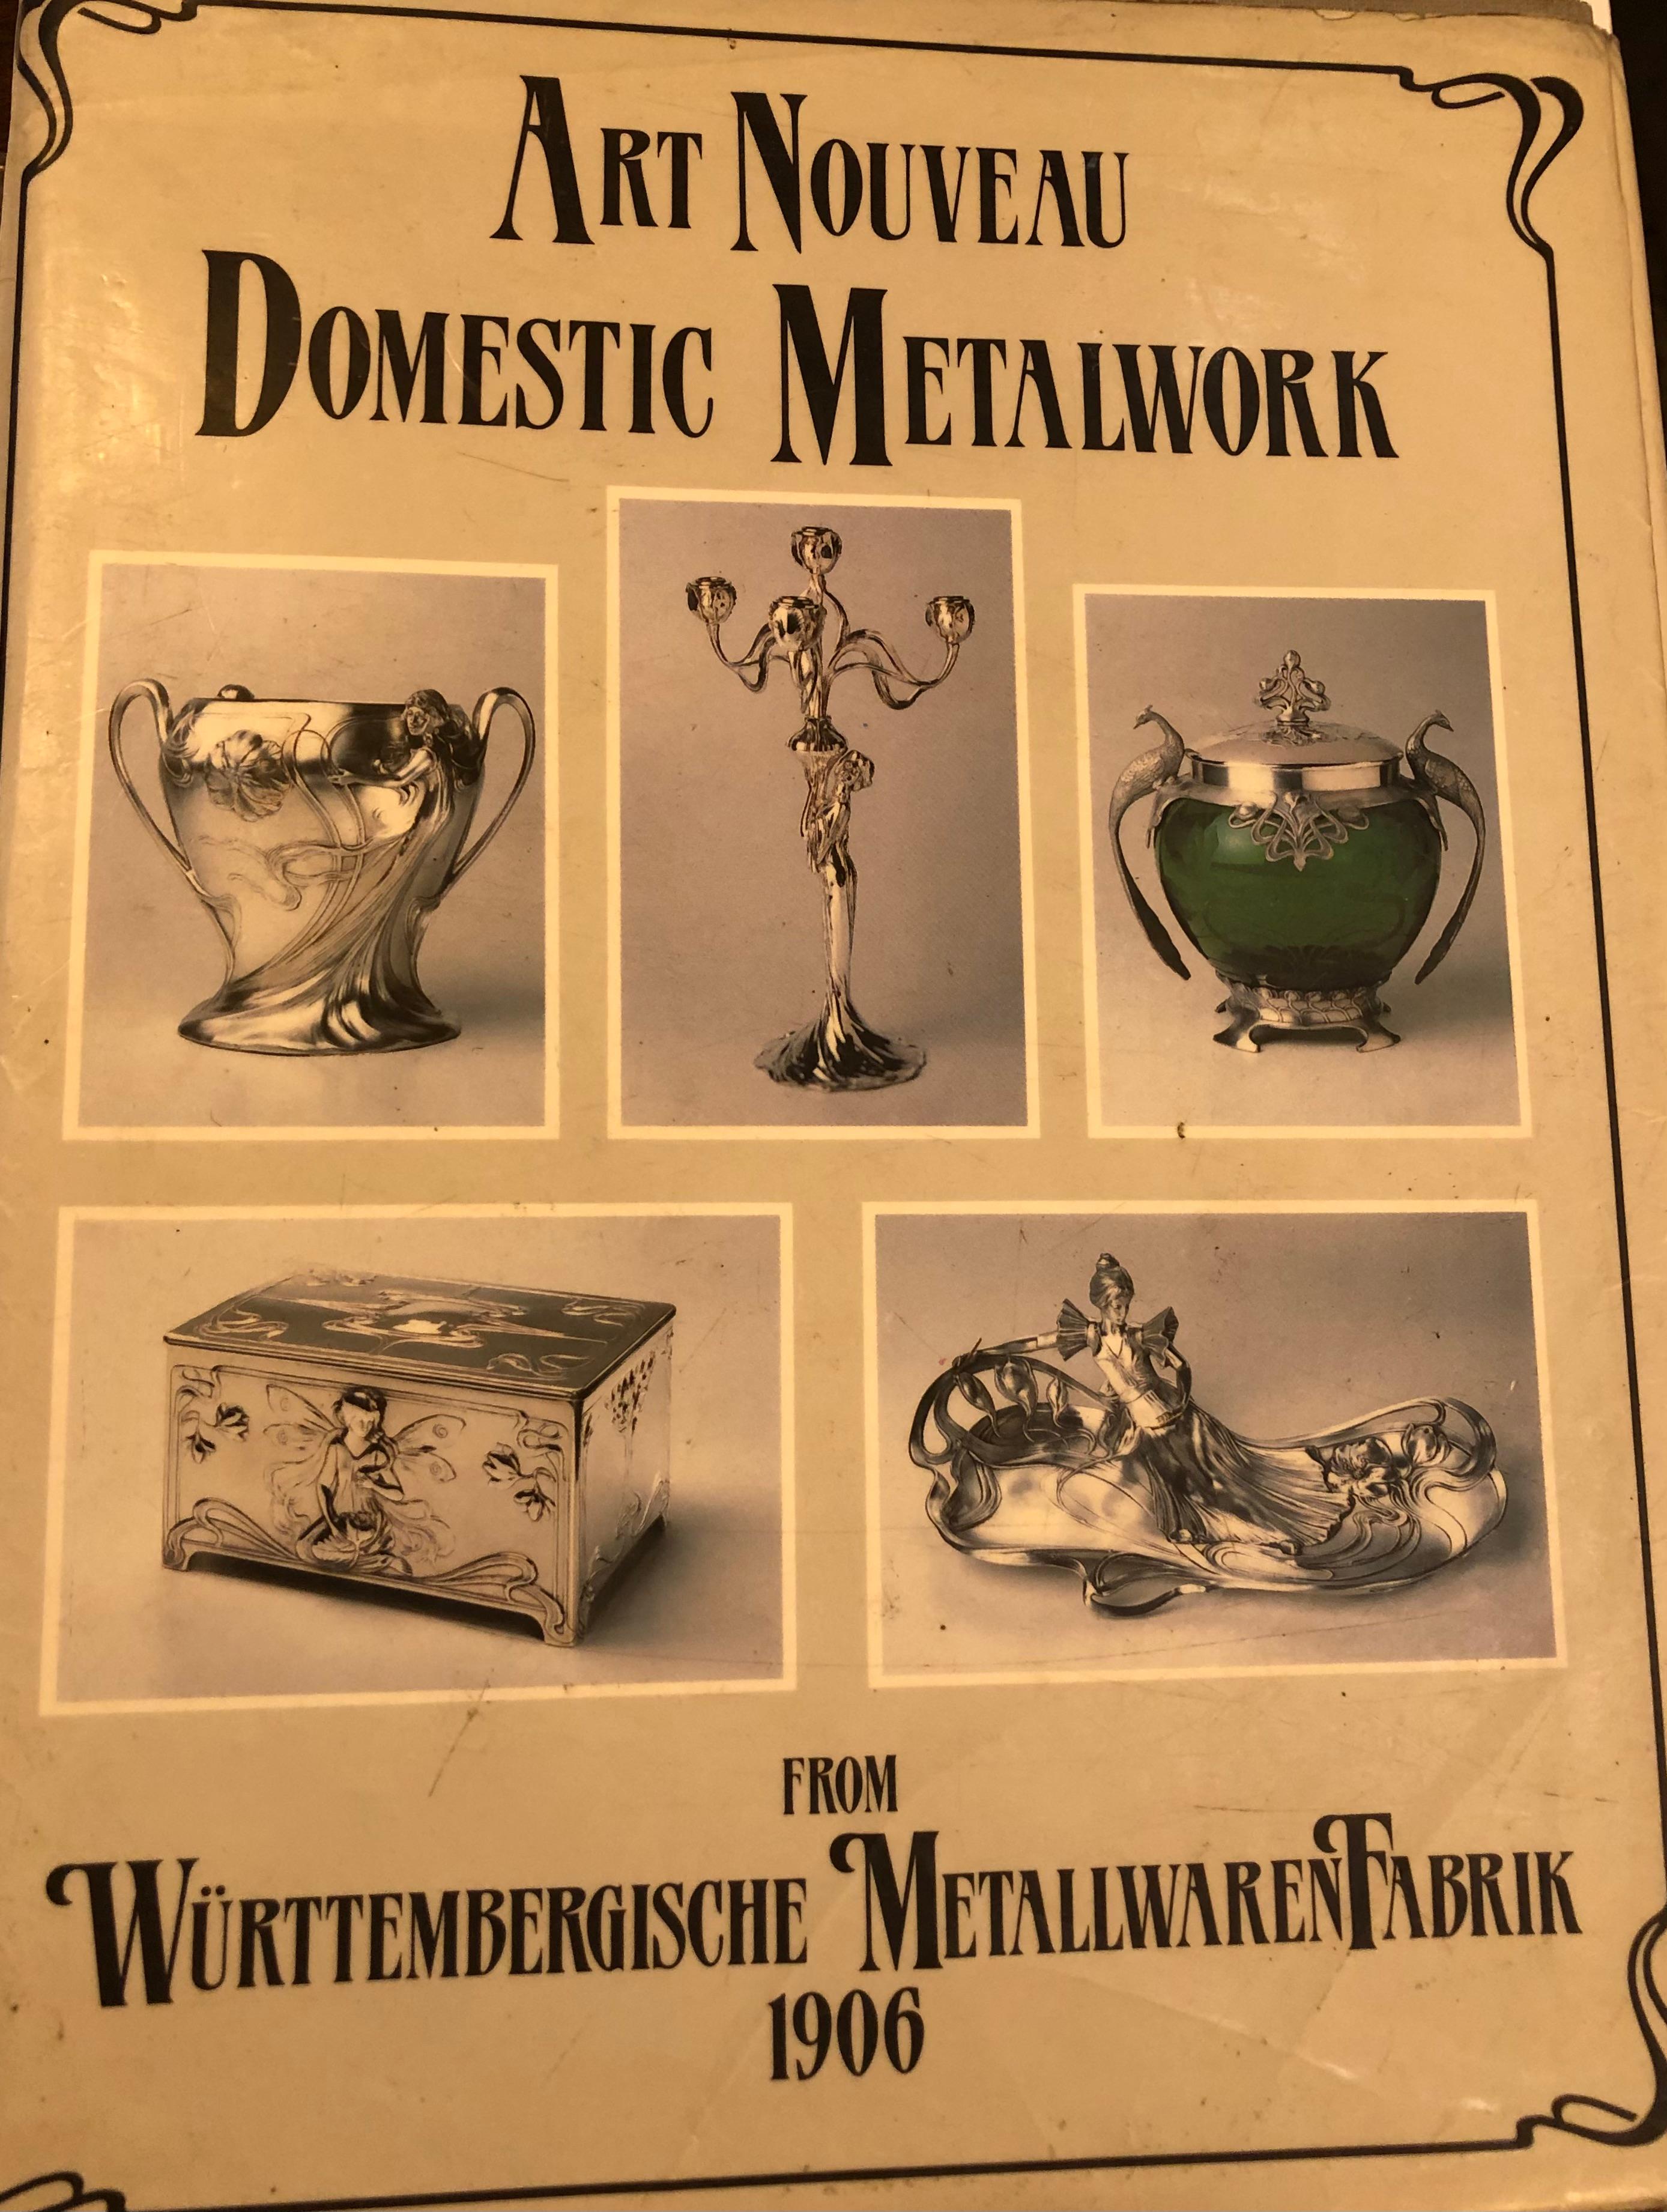 Pair of Champagne cooler WMF
Sign:
Page: X in the Book – Art Nouveau Domestic Metalwork from WMF Wurttembergische Metallwarenfabrik: The English Catalogue 1906 Hardcover.
 WMF G with ostrich = The first WMF impressed mark, used from 1880 to 1925 for